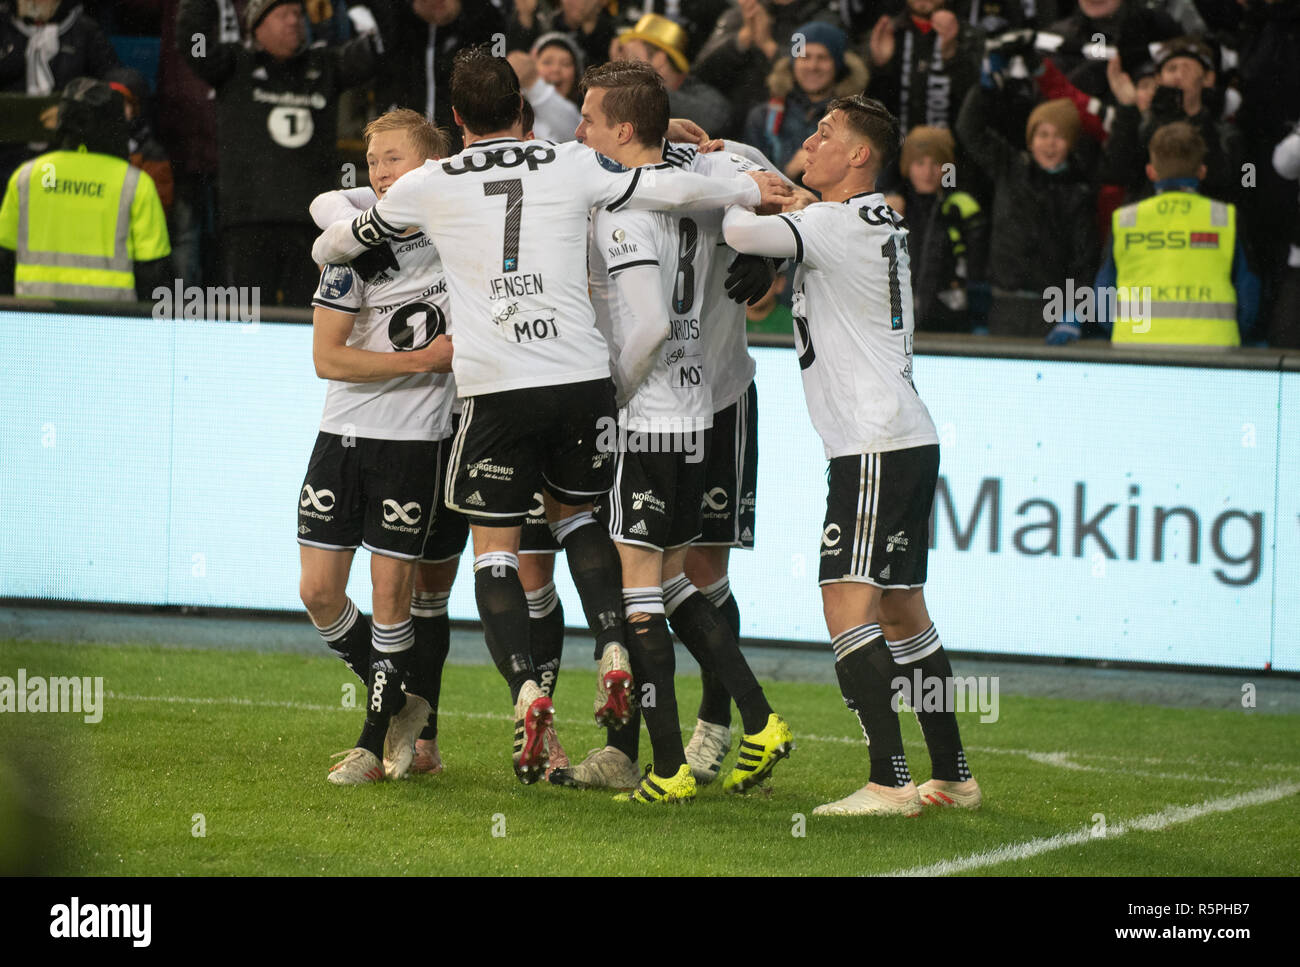 Norway, Oslo. 2nd Dec 2018. The Rosenborgs players celebrate winning the 2018 Norwegian Cup Final 4-1 against Strømsgodset at Ullevaal Stadion in Oslo. (Photo credit: Gonzales Photo - Jan-Erik Eriksen). Credit: Gonzales Photo/Alamy Live News Stock Photo